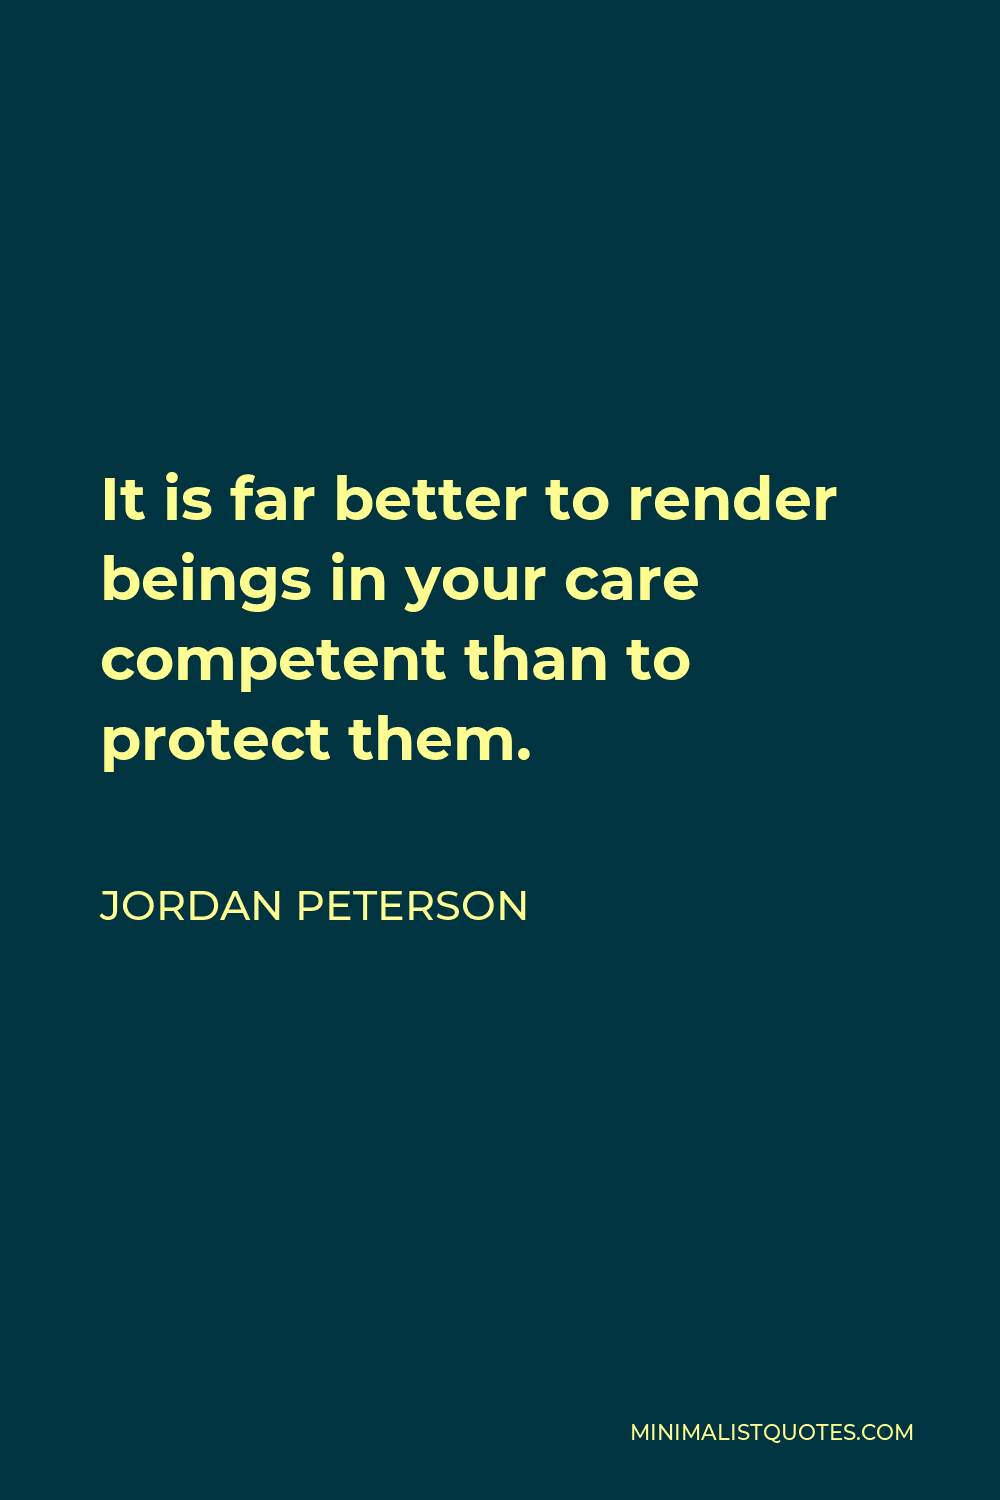 Jordan Peterson Quote - It is far better to render beings in your car competent than to protect them.